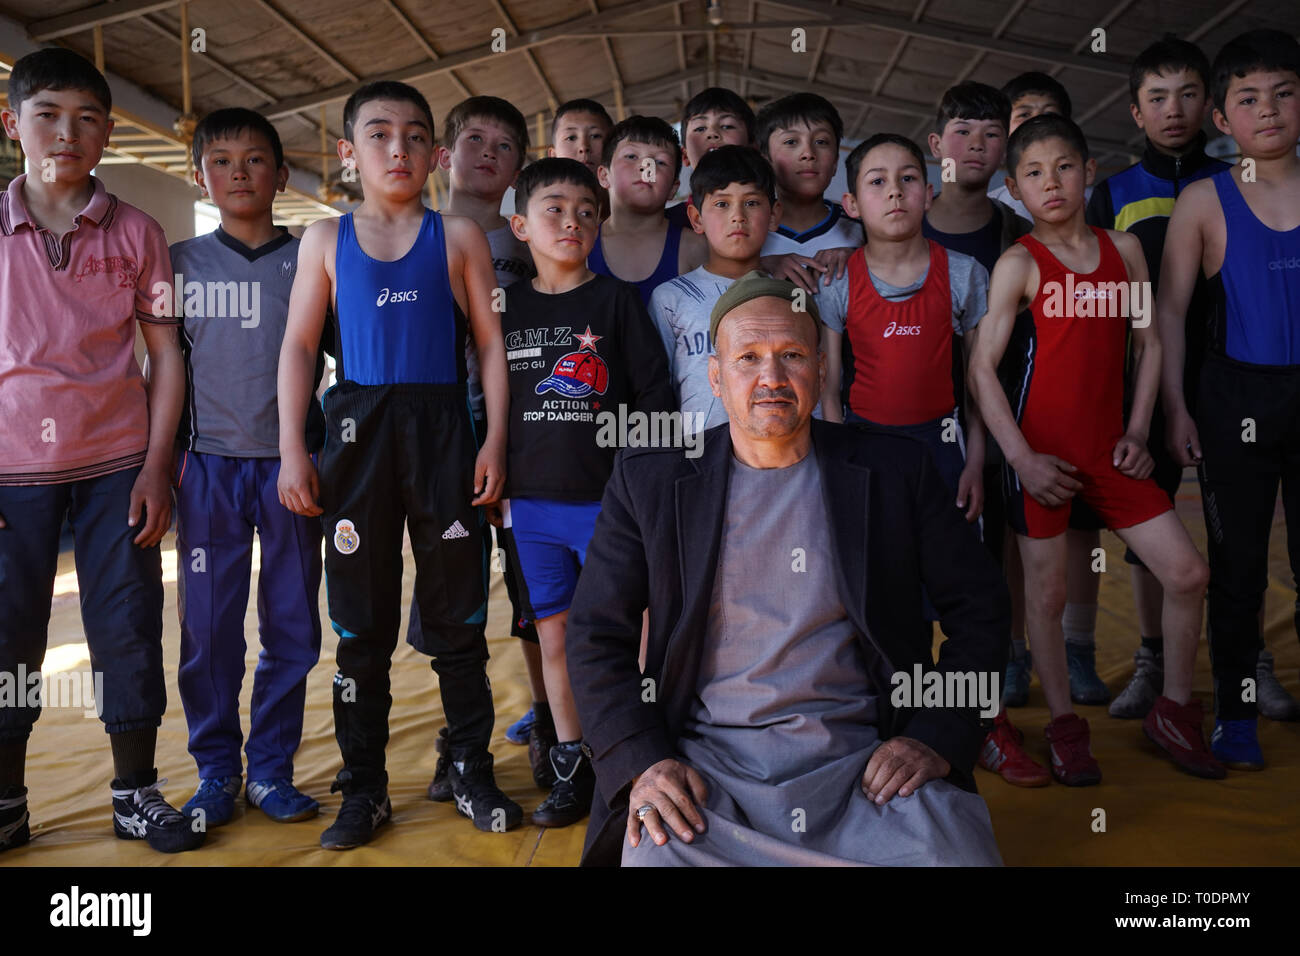 The Maiwand Wrestling club was attacked by suicide bombers from the Islamic State of Iraq and the Levant (ISIL or ISIS) group last September. At least 20 people were killed and 70 wounded in the assault at the club in Dash-e-Barchi, a neighbourhood in Kabul's west, home to a sizeable Hazara community. Coach Ghulam Abbas lost his left arm in what he said was an attack on the ethnic Hazara minority. In an act of resistance, Abbas has now returned to the wrestling club where he taught for 30 years. Stock Photo